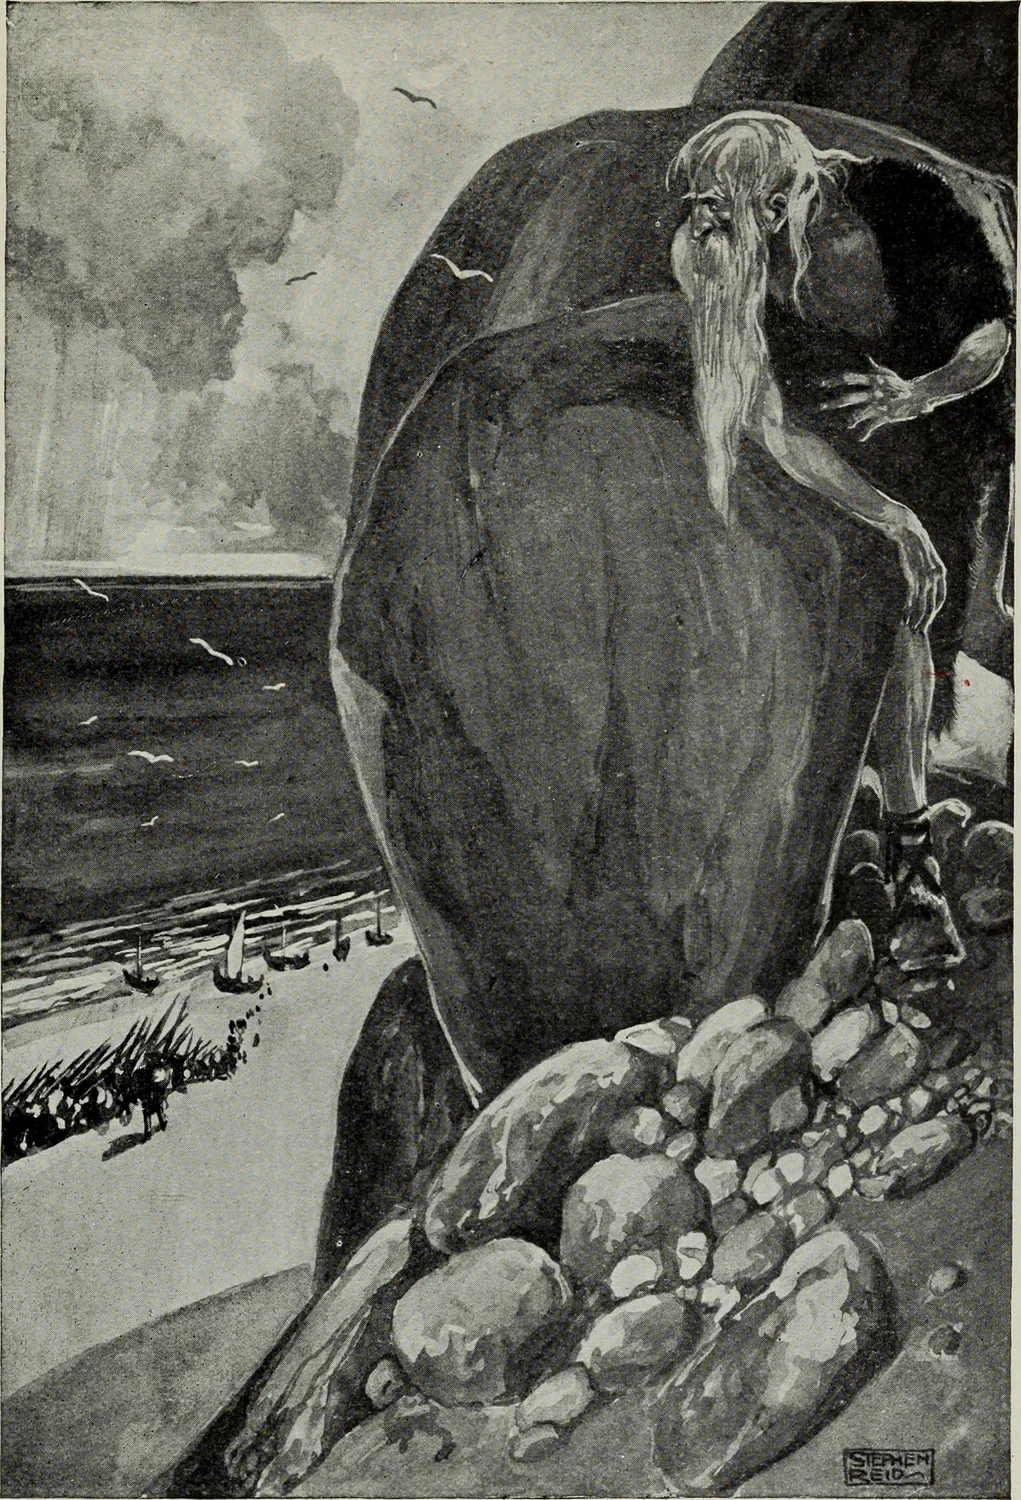 Black and white painting of an old man with a long flowing beard hiding behind a rock on a mountainside. On the beach below, ships and warriors are arriving.